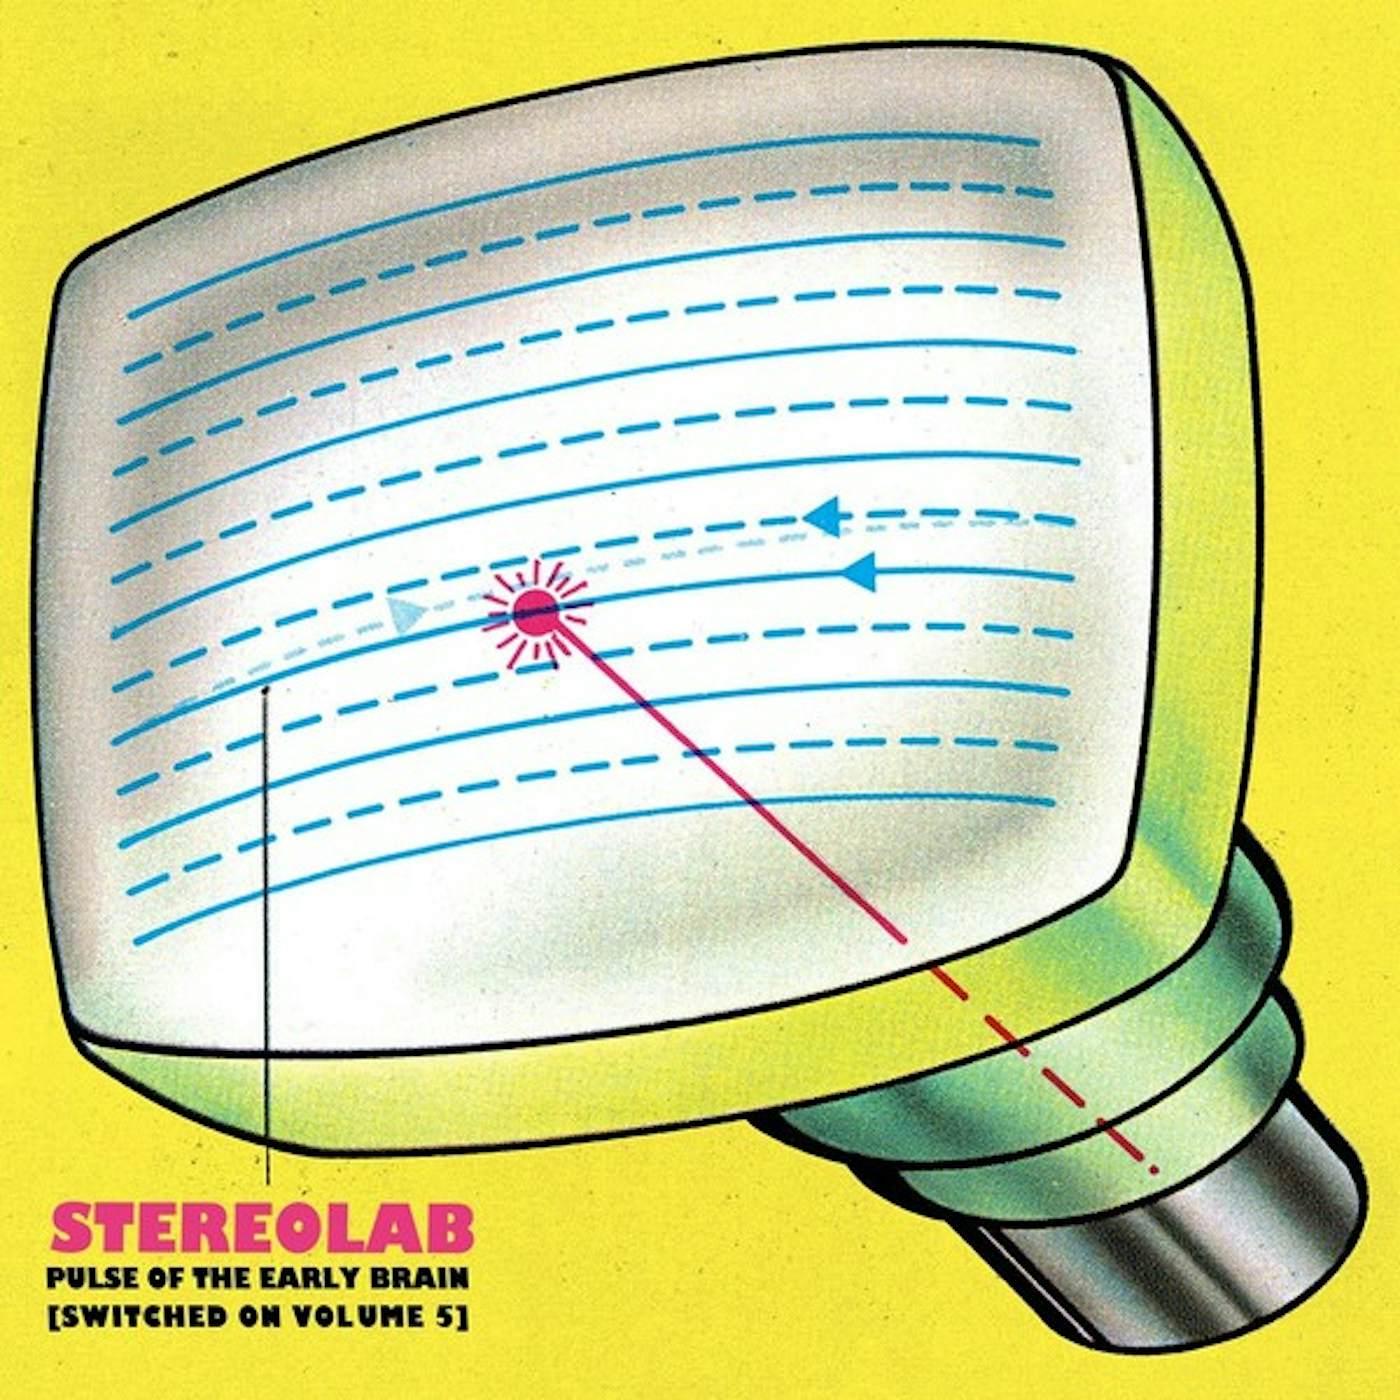 Stereolab Pulse Of The Early Brain (Switched On Volume 5) (3LP